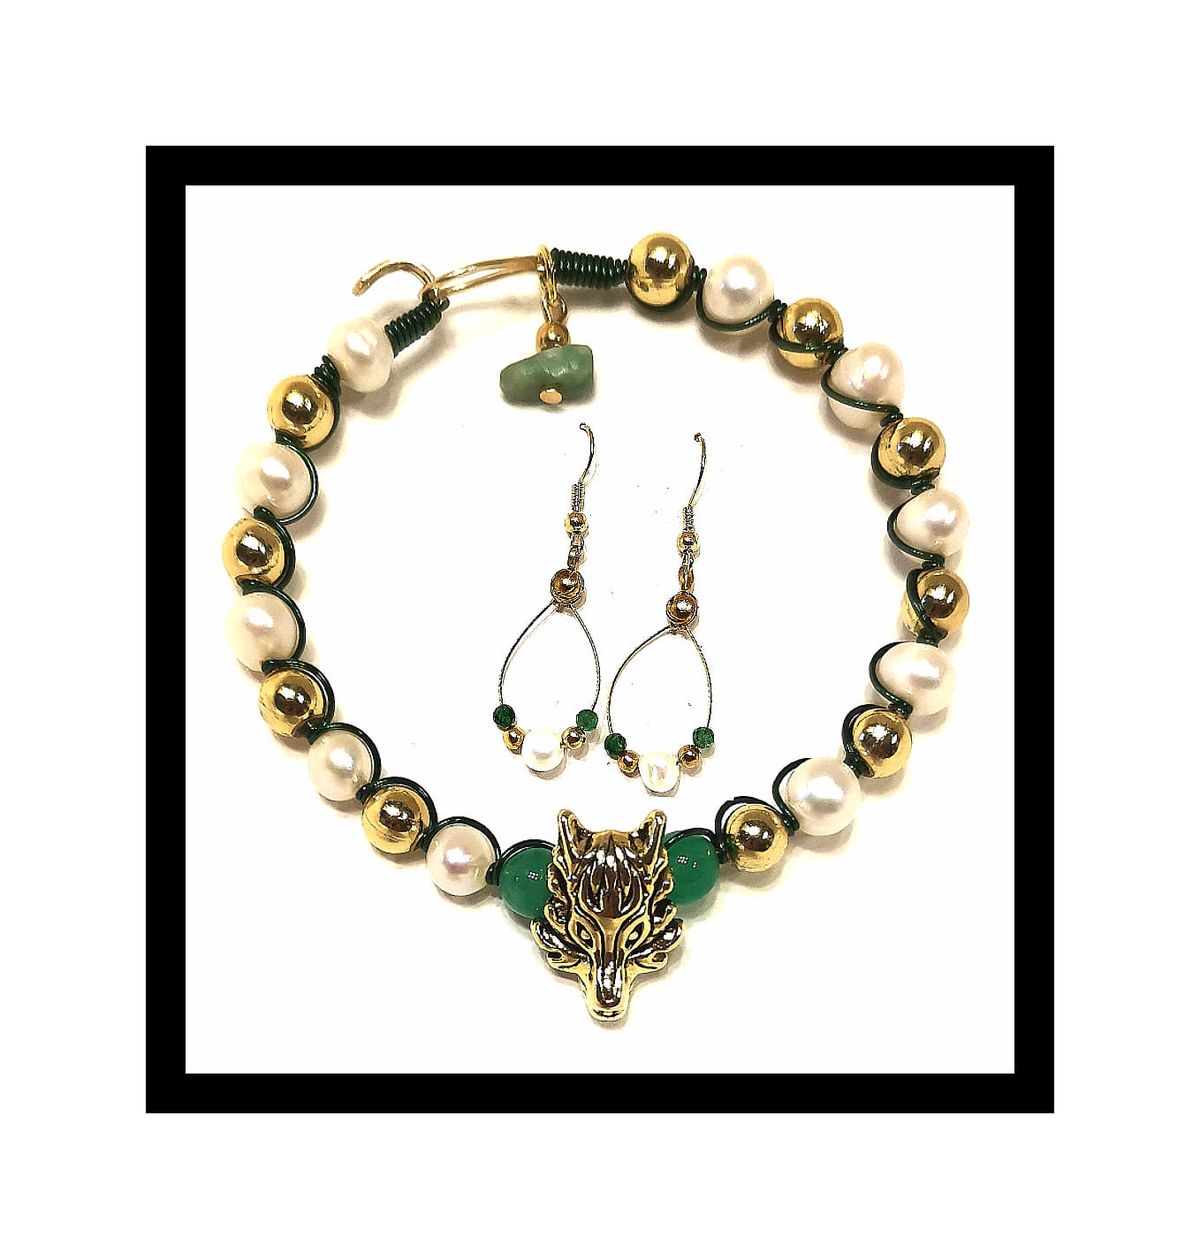 Bead Society class: Let Us Celebrate the Year of Dragon - Wired Dragon Bracelet & Earrings